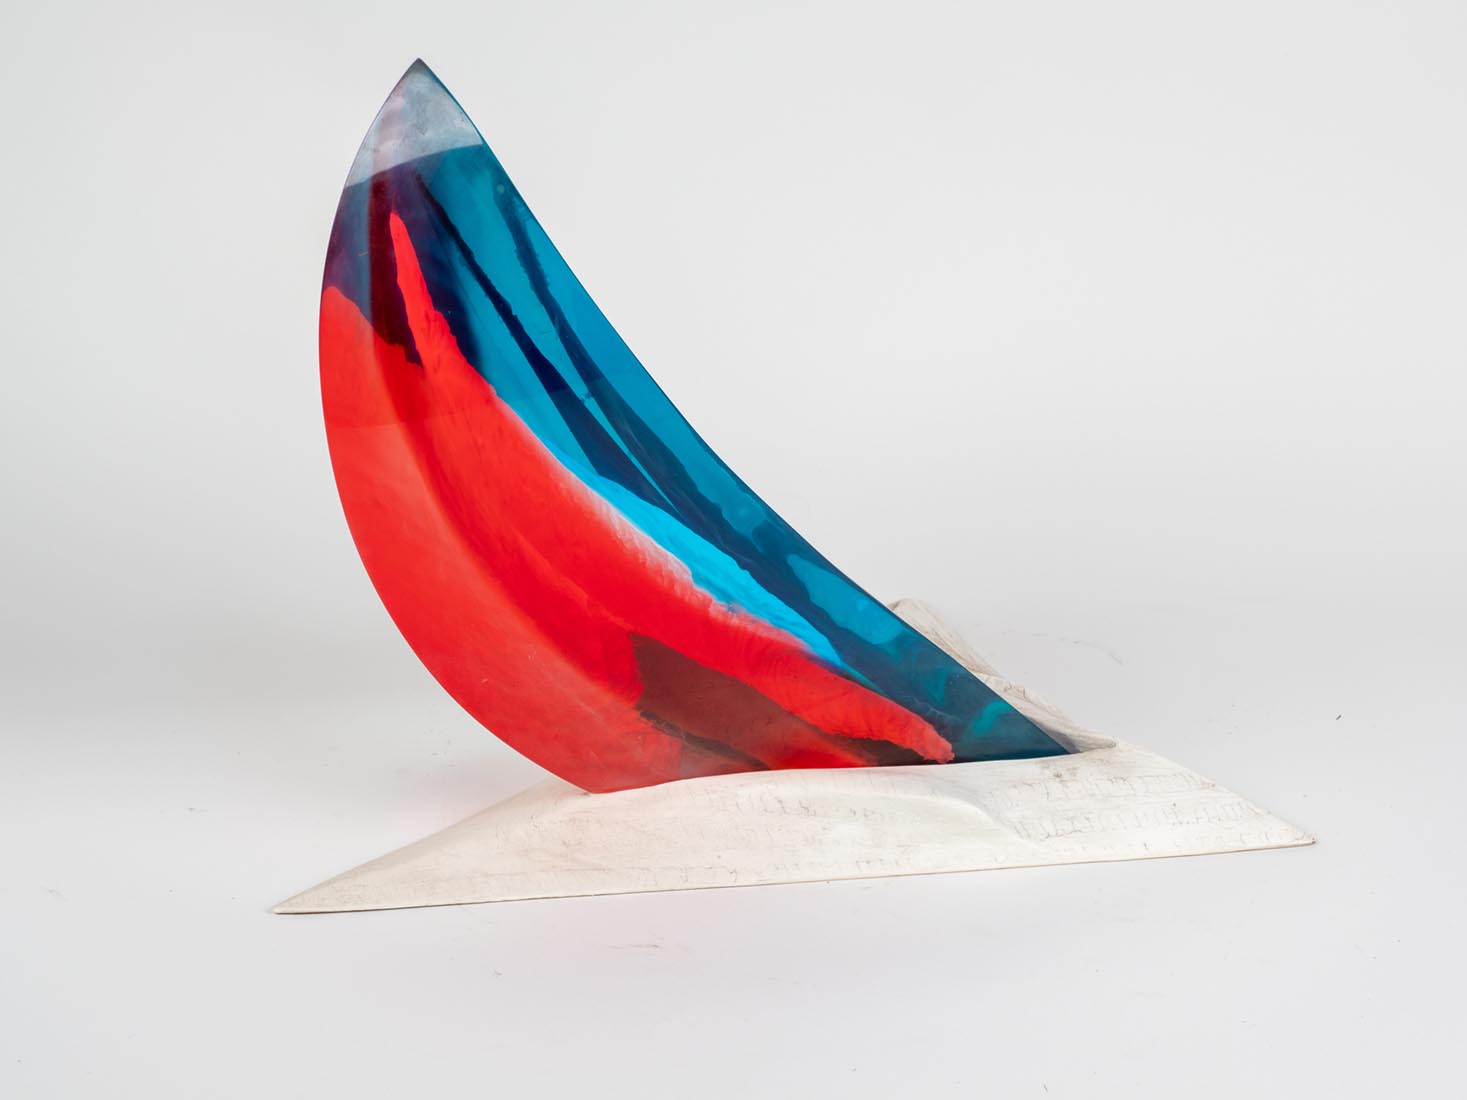 Cast Lucite spinaker sculpture by Marjorie White Williams